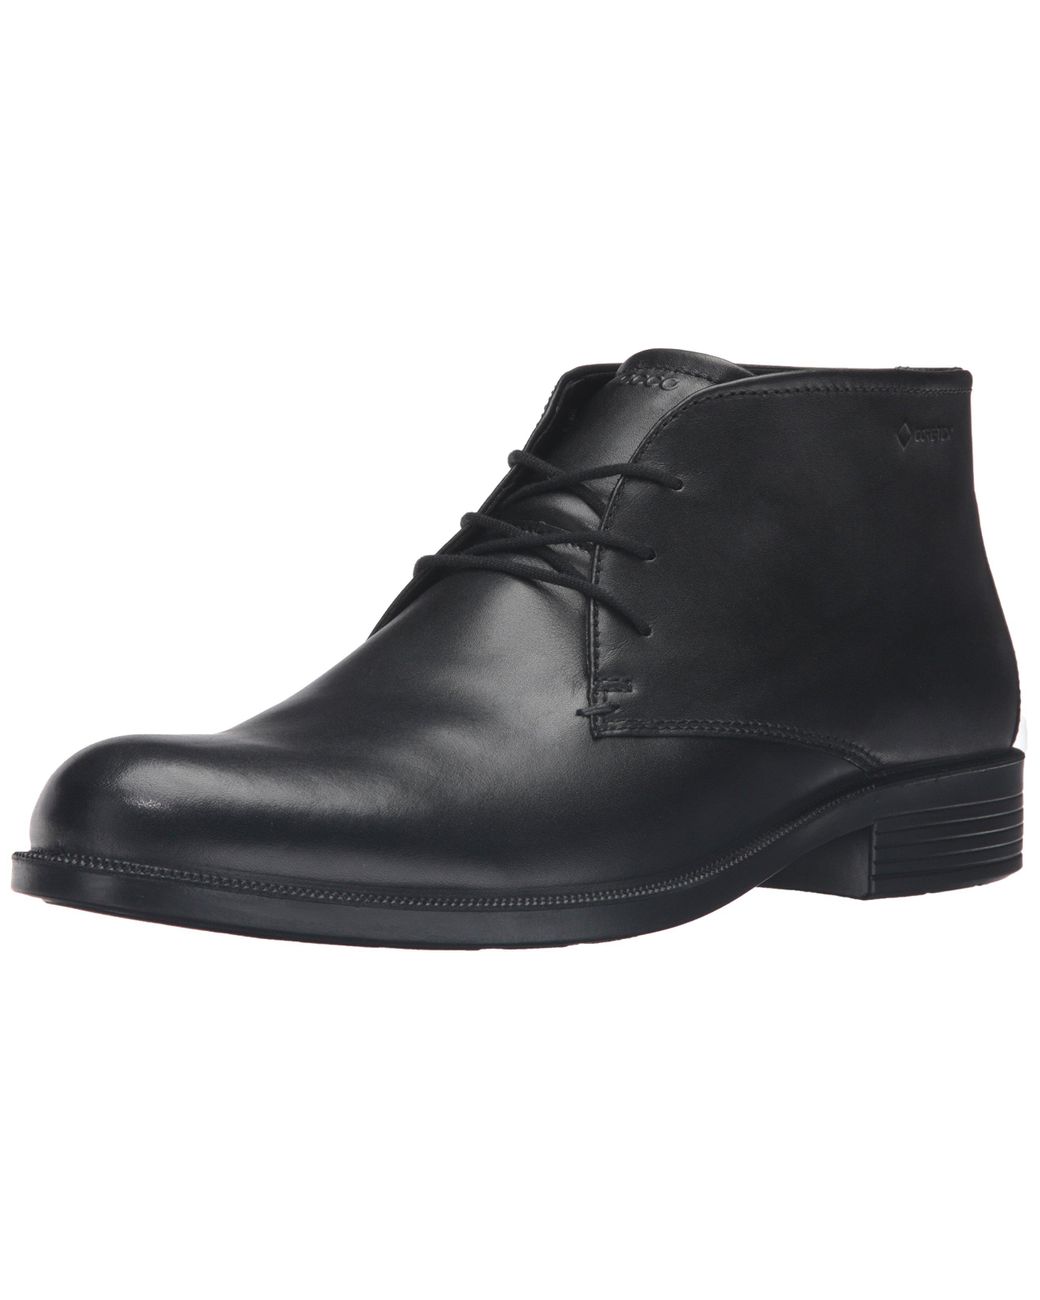 Ecco Leather Harold Gore-tex Boot Ankle in Black for Men - Lyst